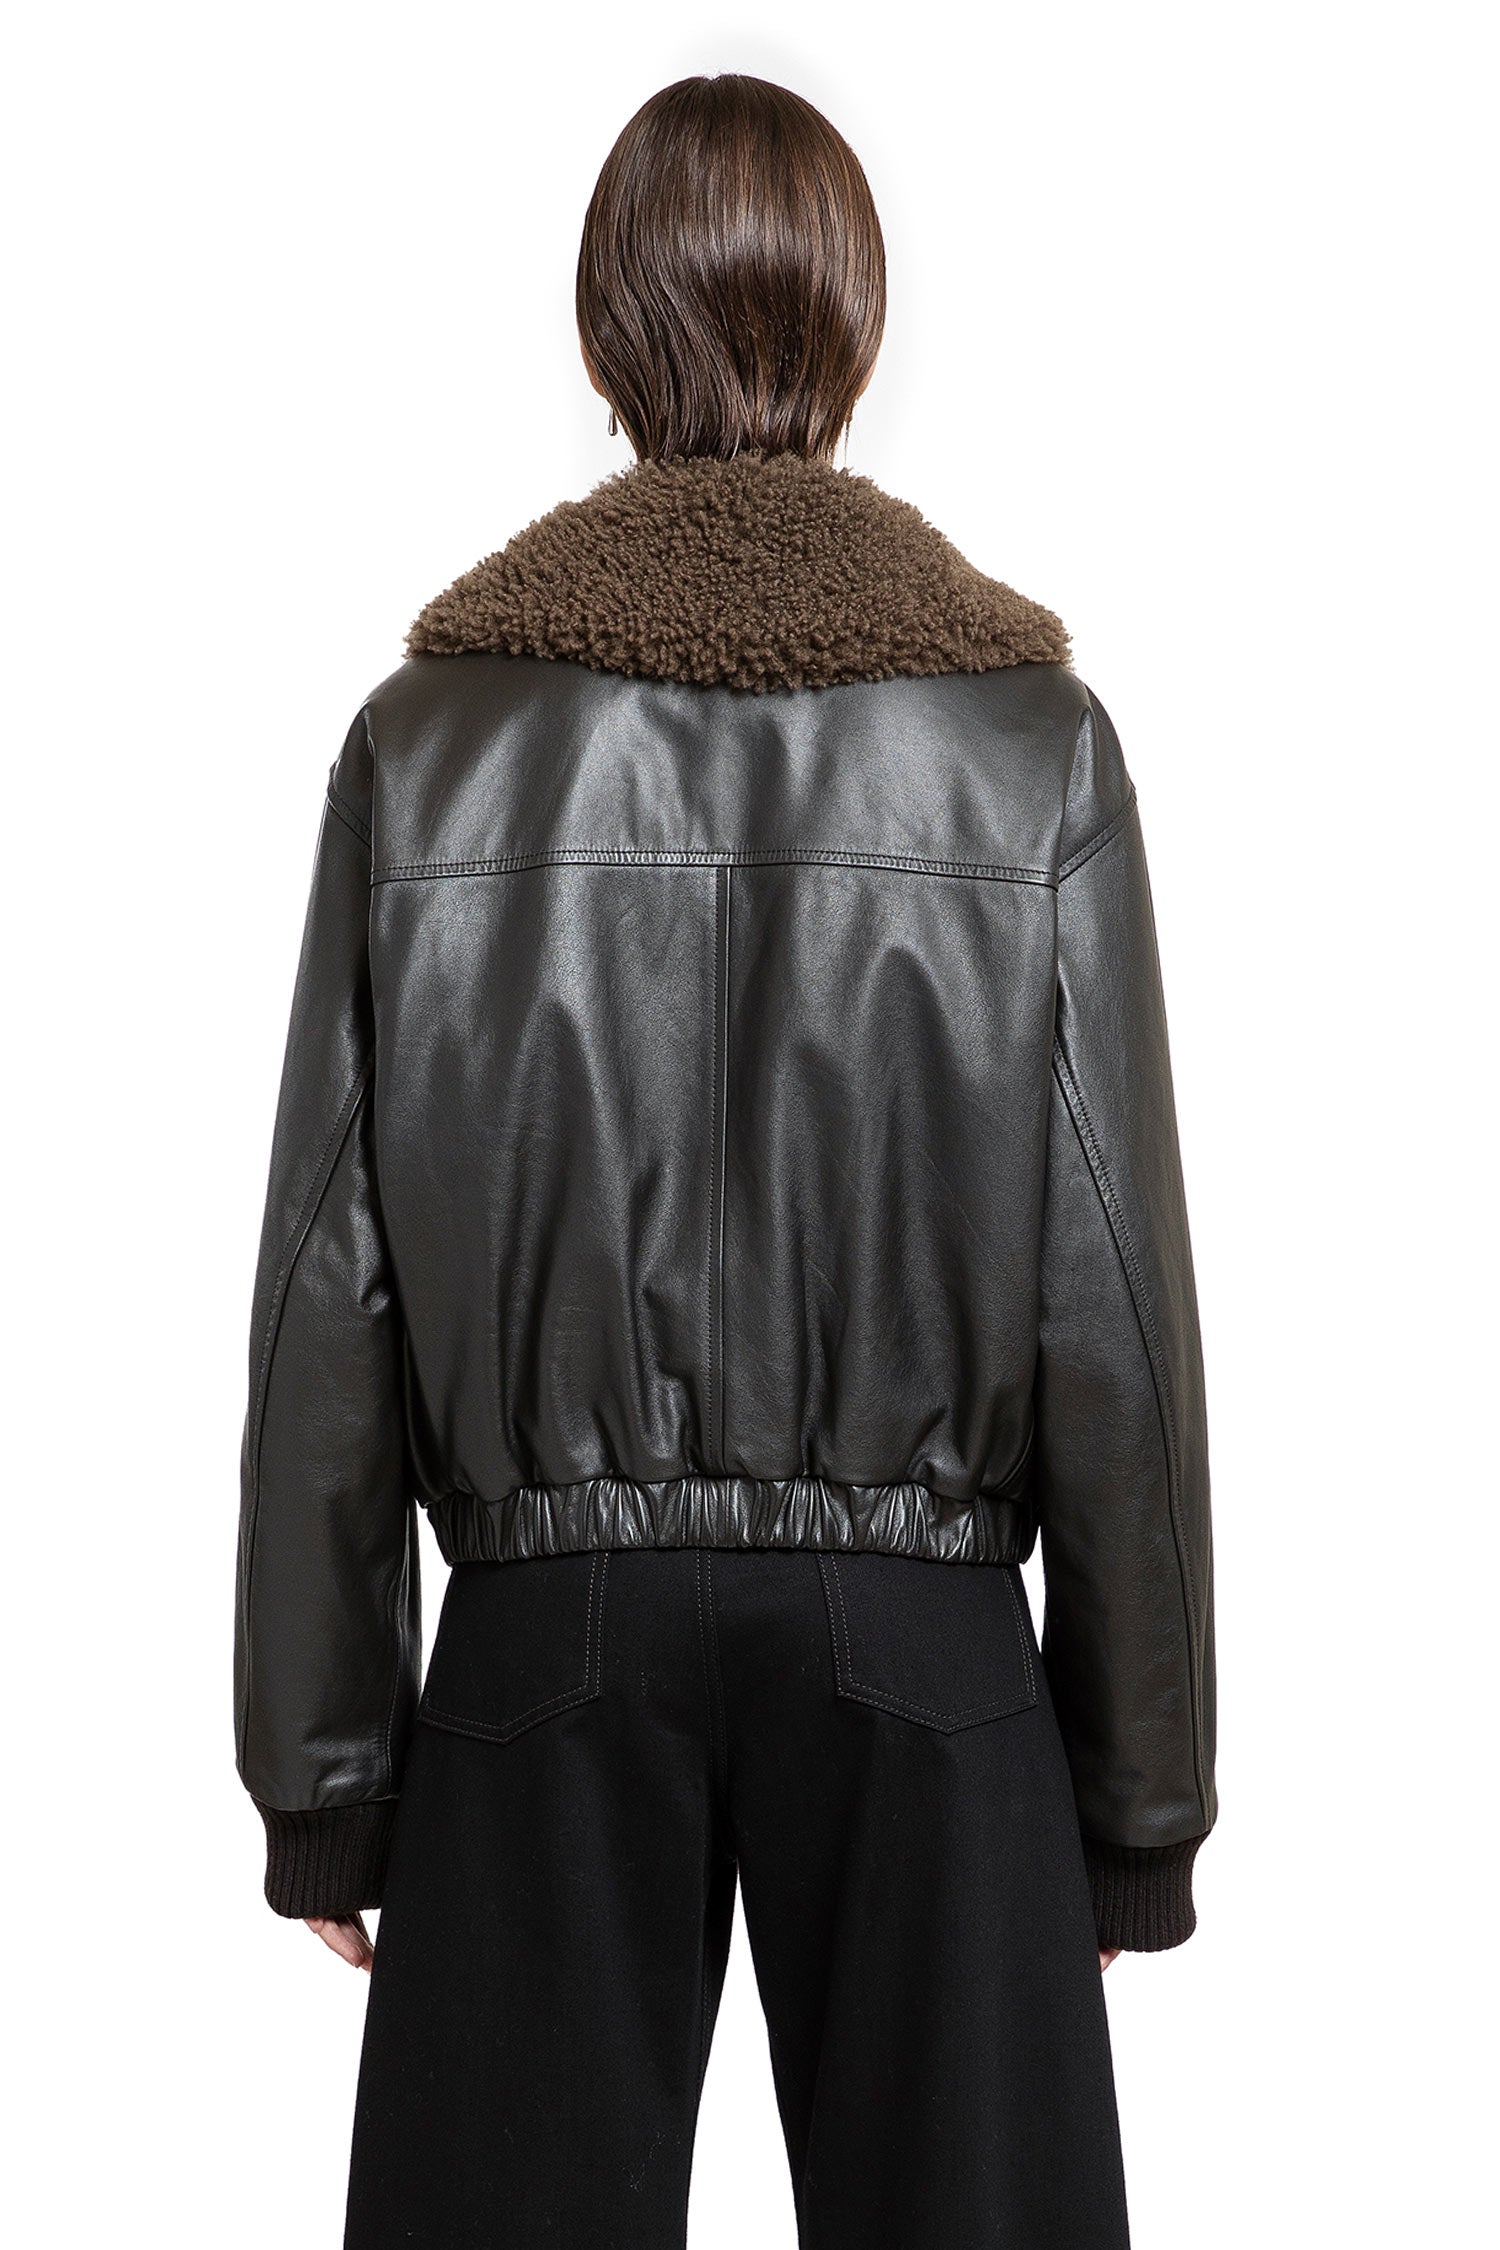 LEMAIRE WOMAN BROWN JACKETS